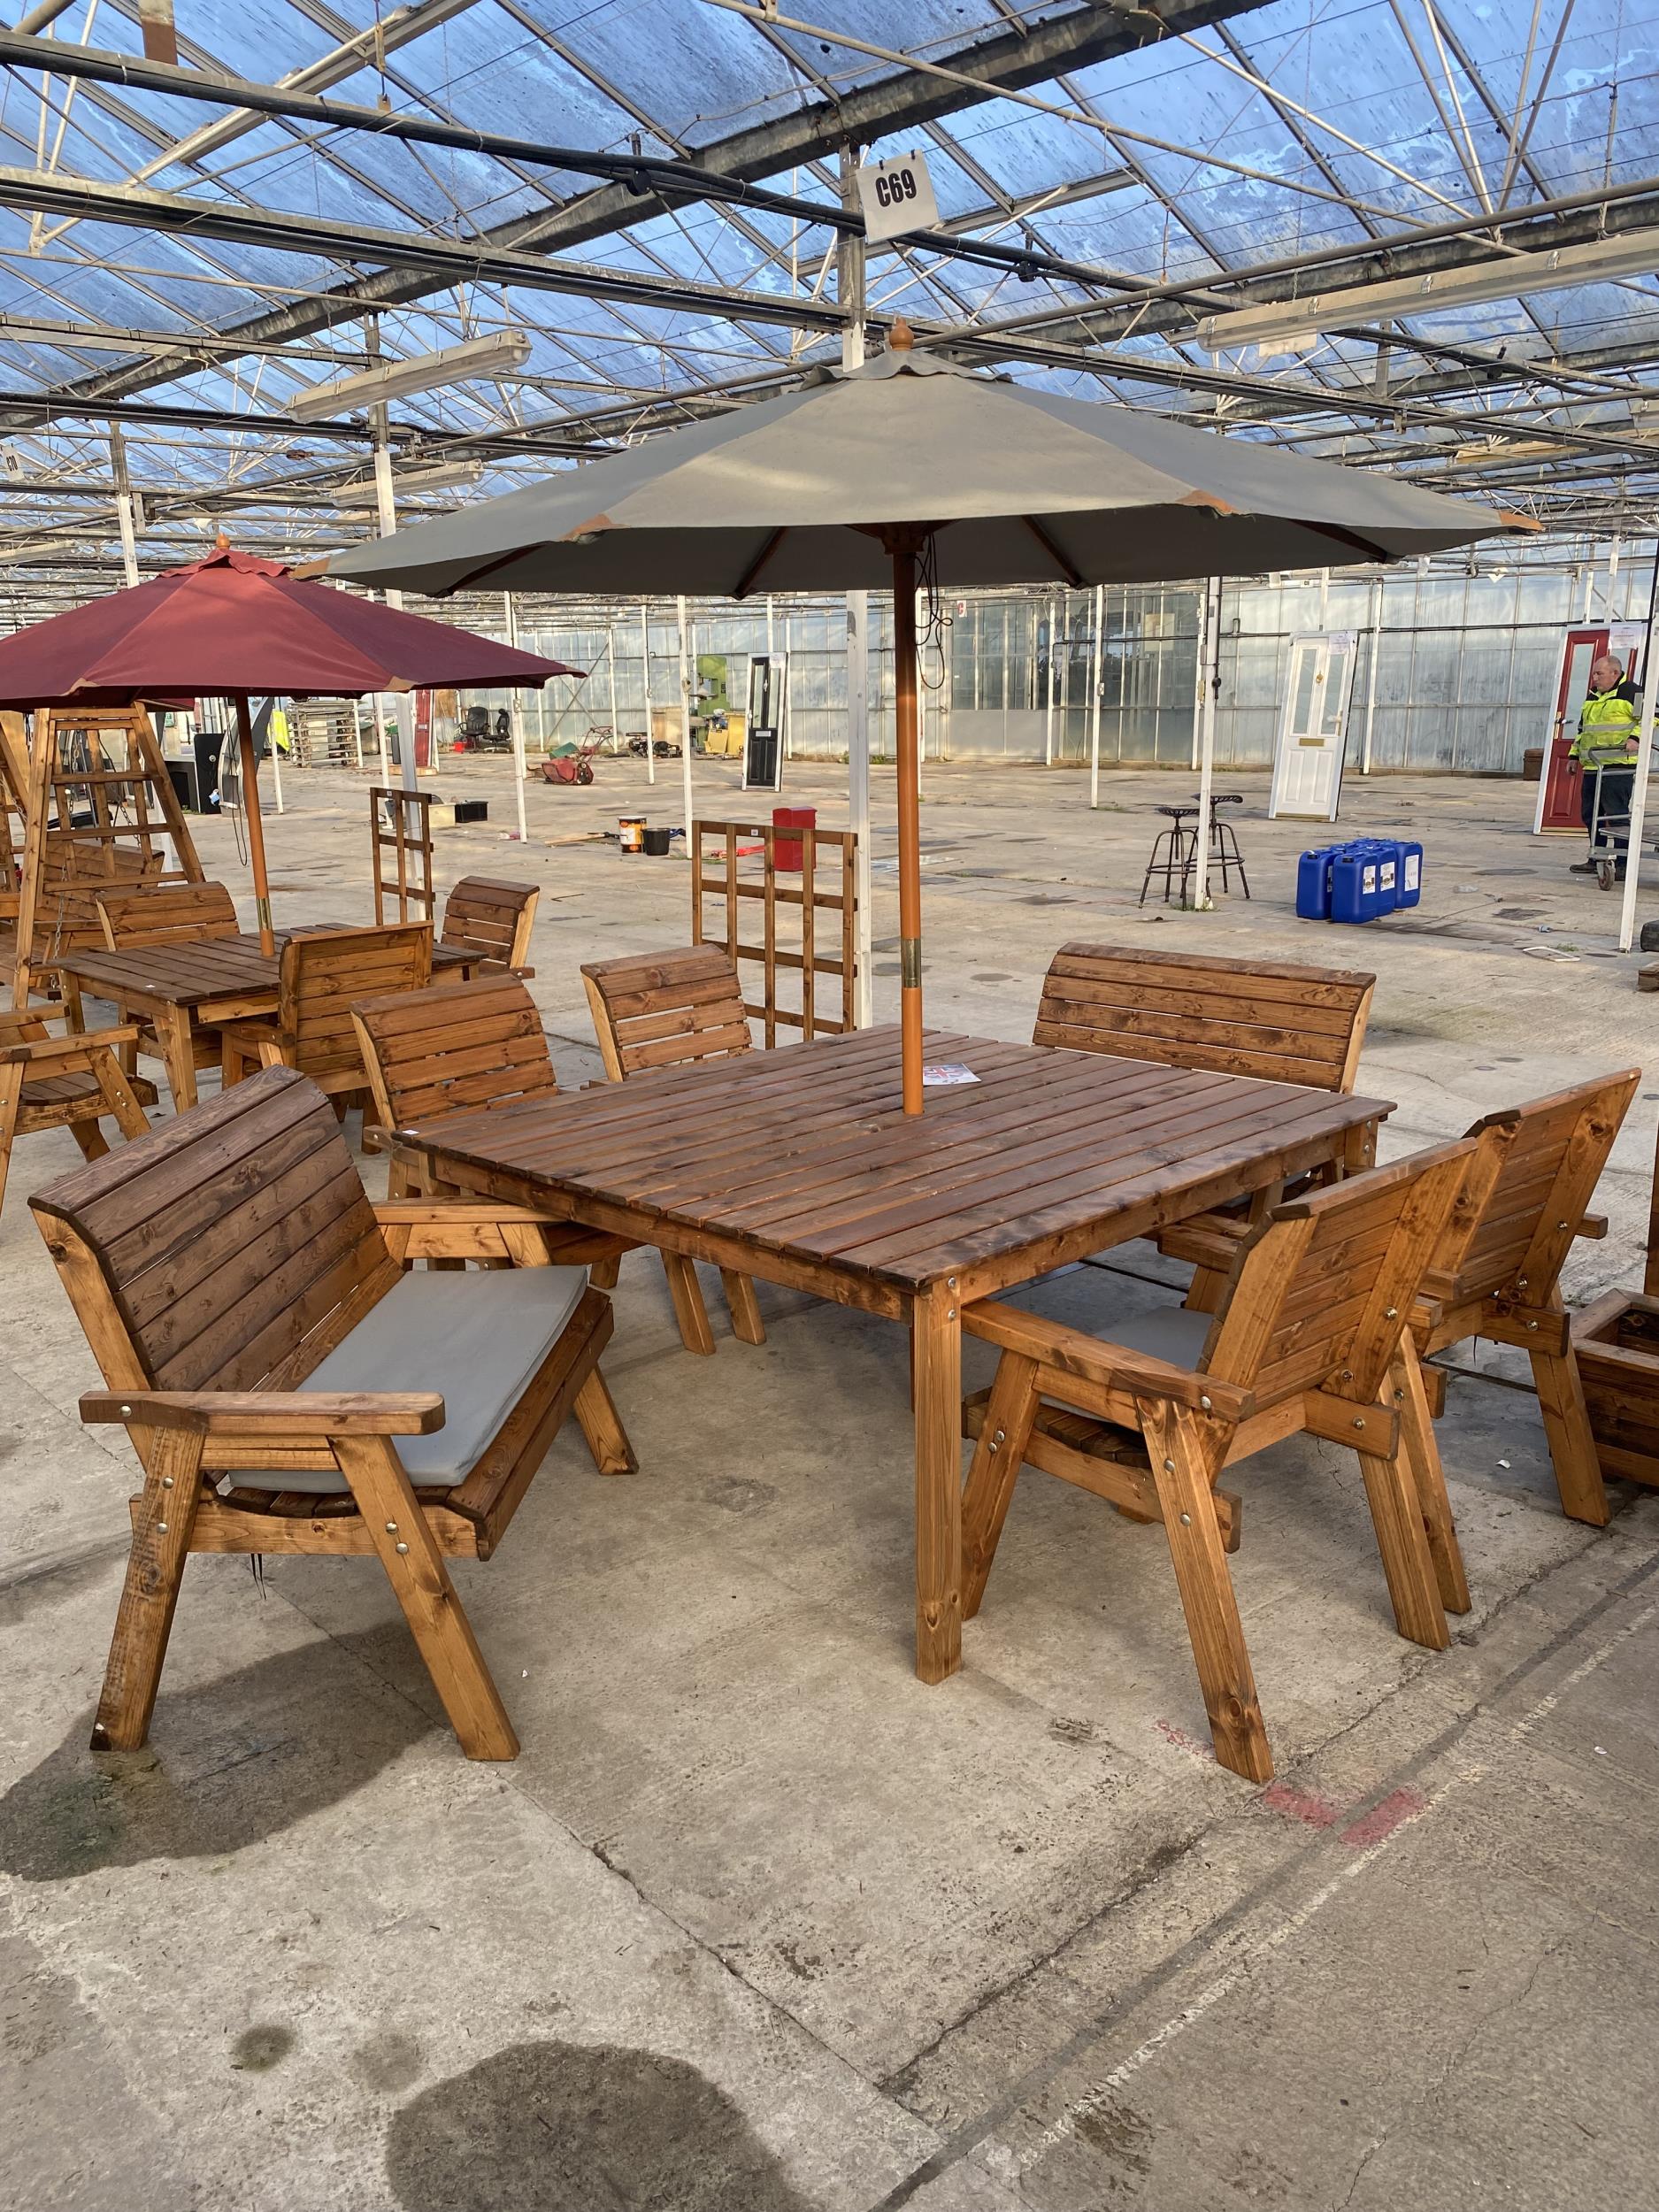 AN AS NEW EX DISPLAY CHARLES TAYLOR PATIO FURNITURE SET COMPRISING OF A LARGE SQUARE TABLE, FOUR - Bild 5 aus 5